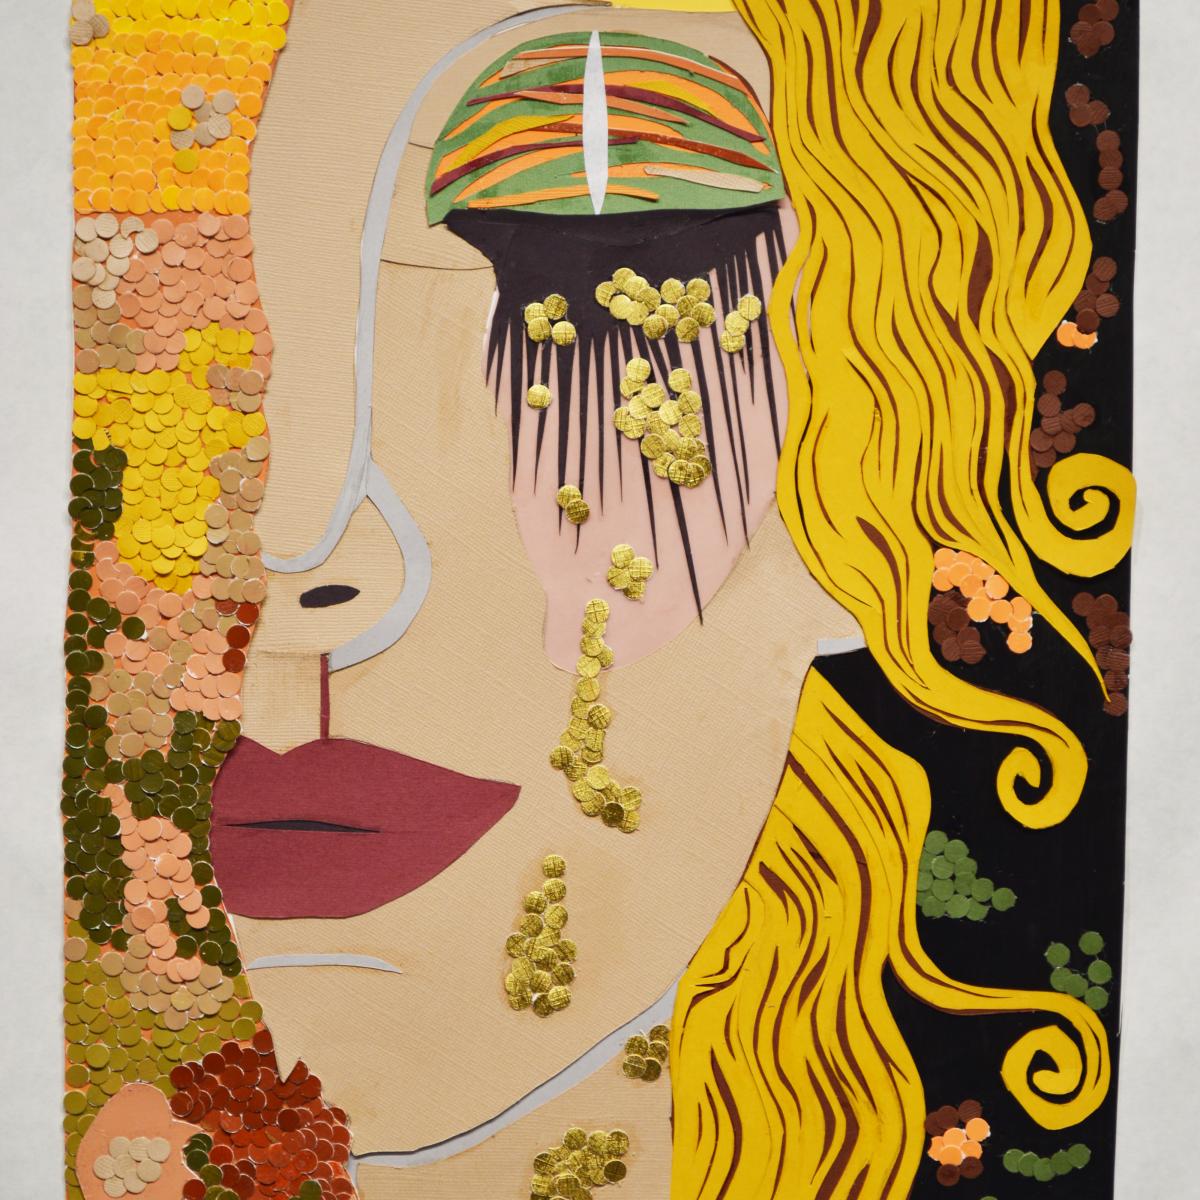 Painting in the style of Gustav Klimt of the side of a face with gold eyeshadow and red lipstick and yellow wavy hair.